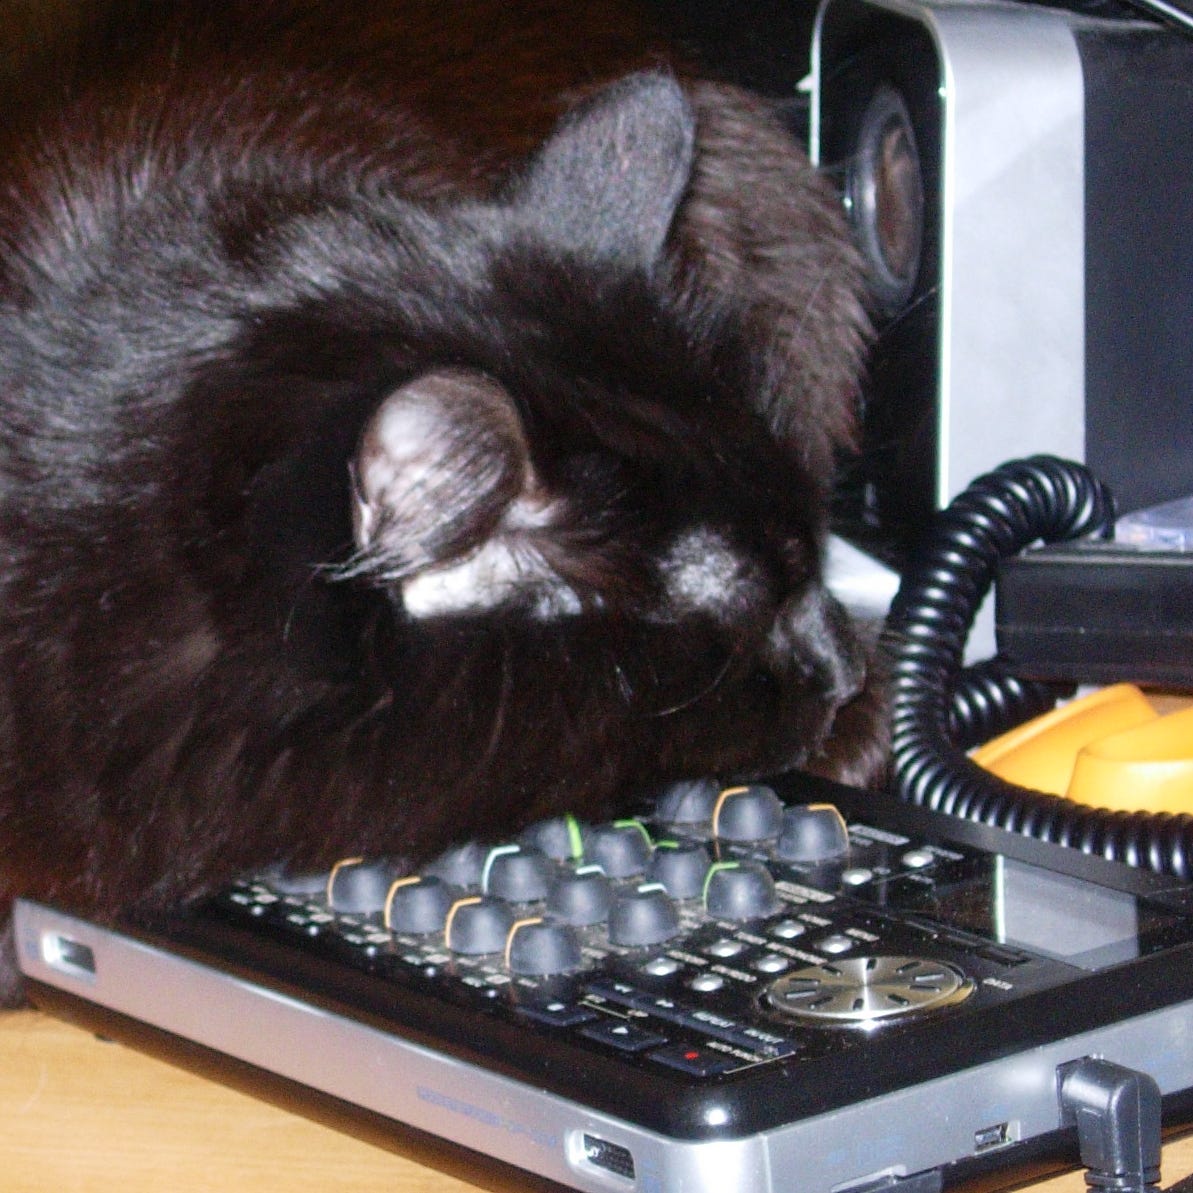 The PODCat is sound asleep using a small portable sound mixer as a pillow. His dainty cheek rests against the rows of rubber-capped dials. He’s not even bothered to share the limited desktop space with a small computer speaker and the long, coiled cable of a pair of headphones.